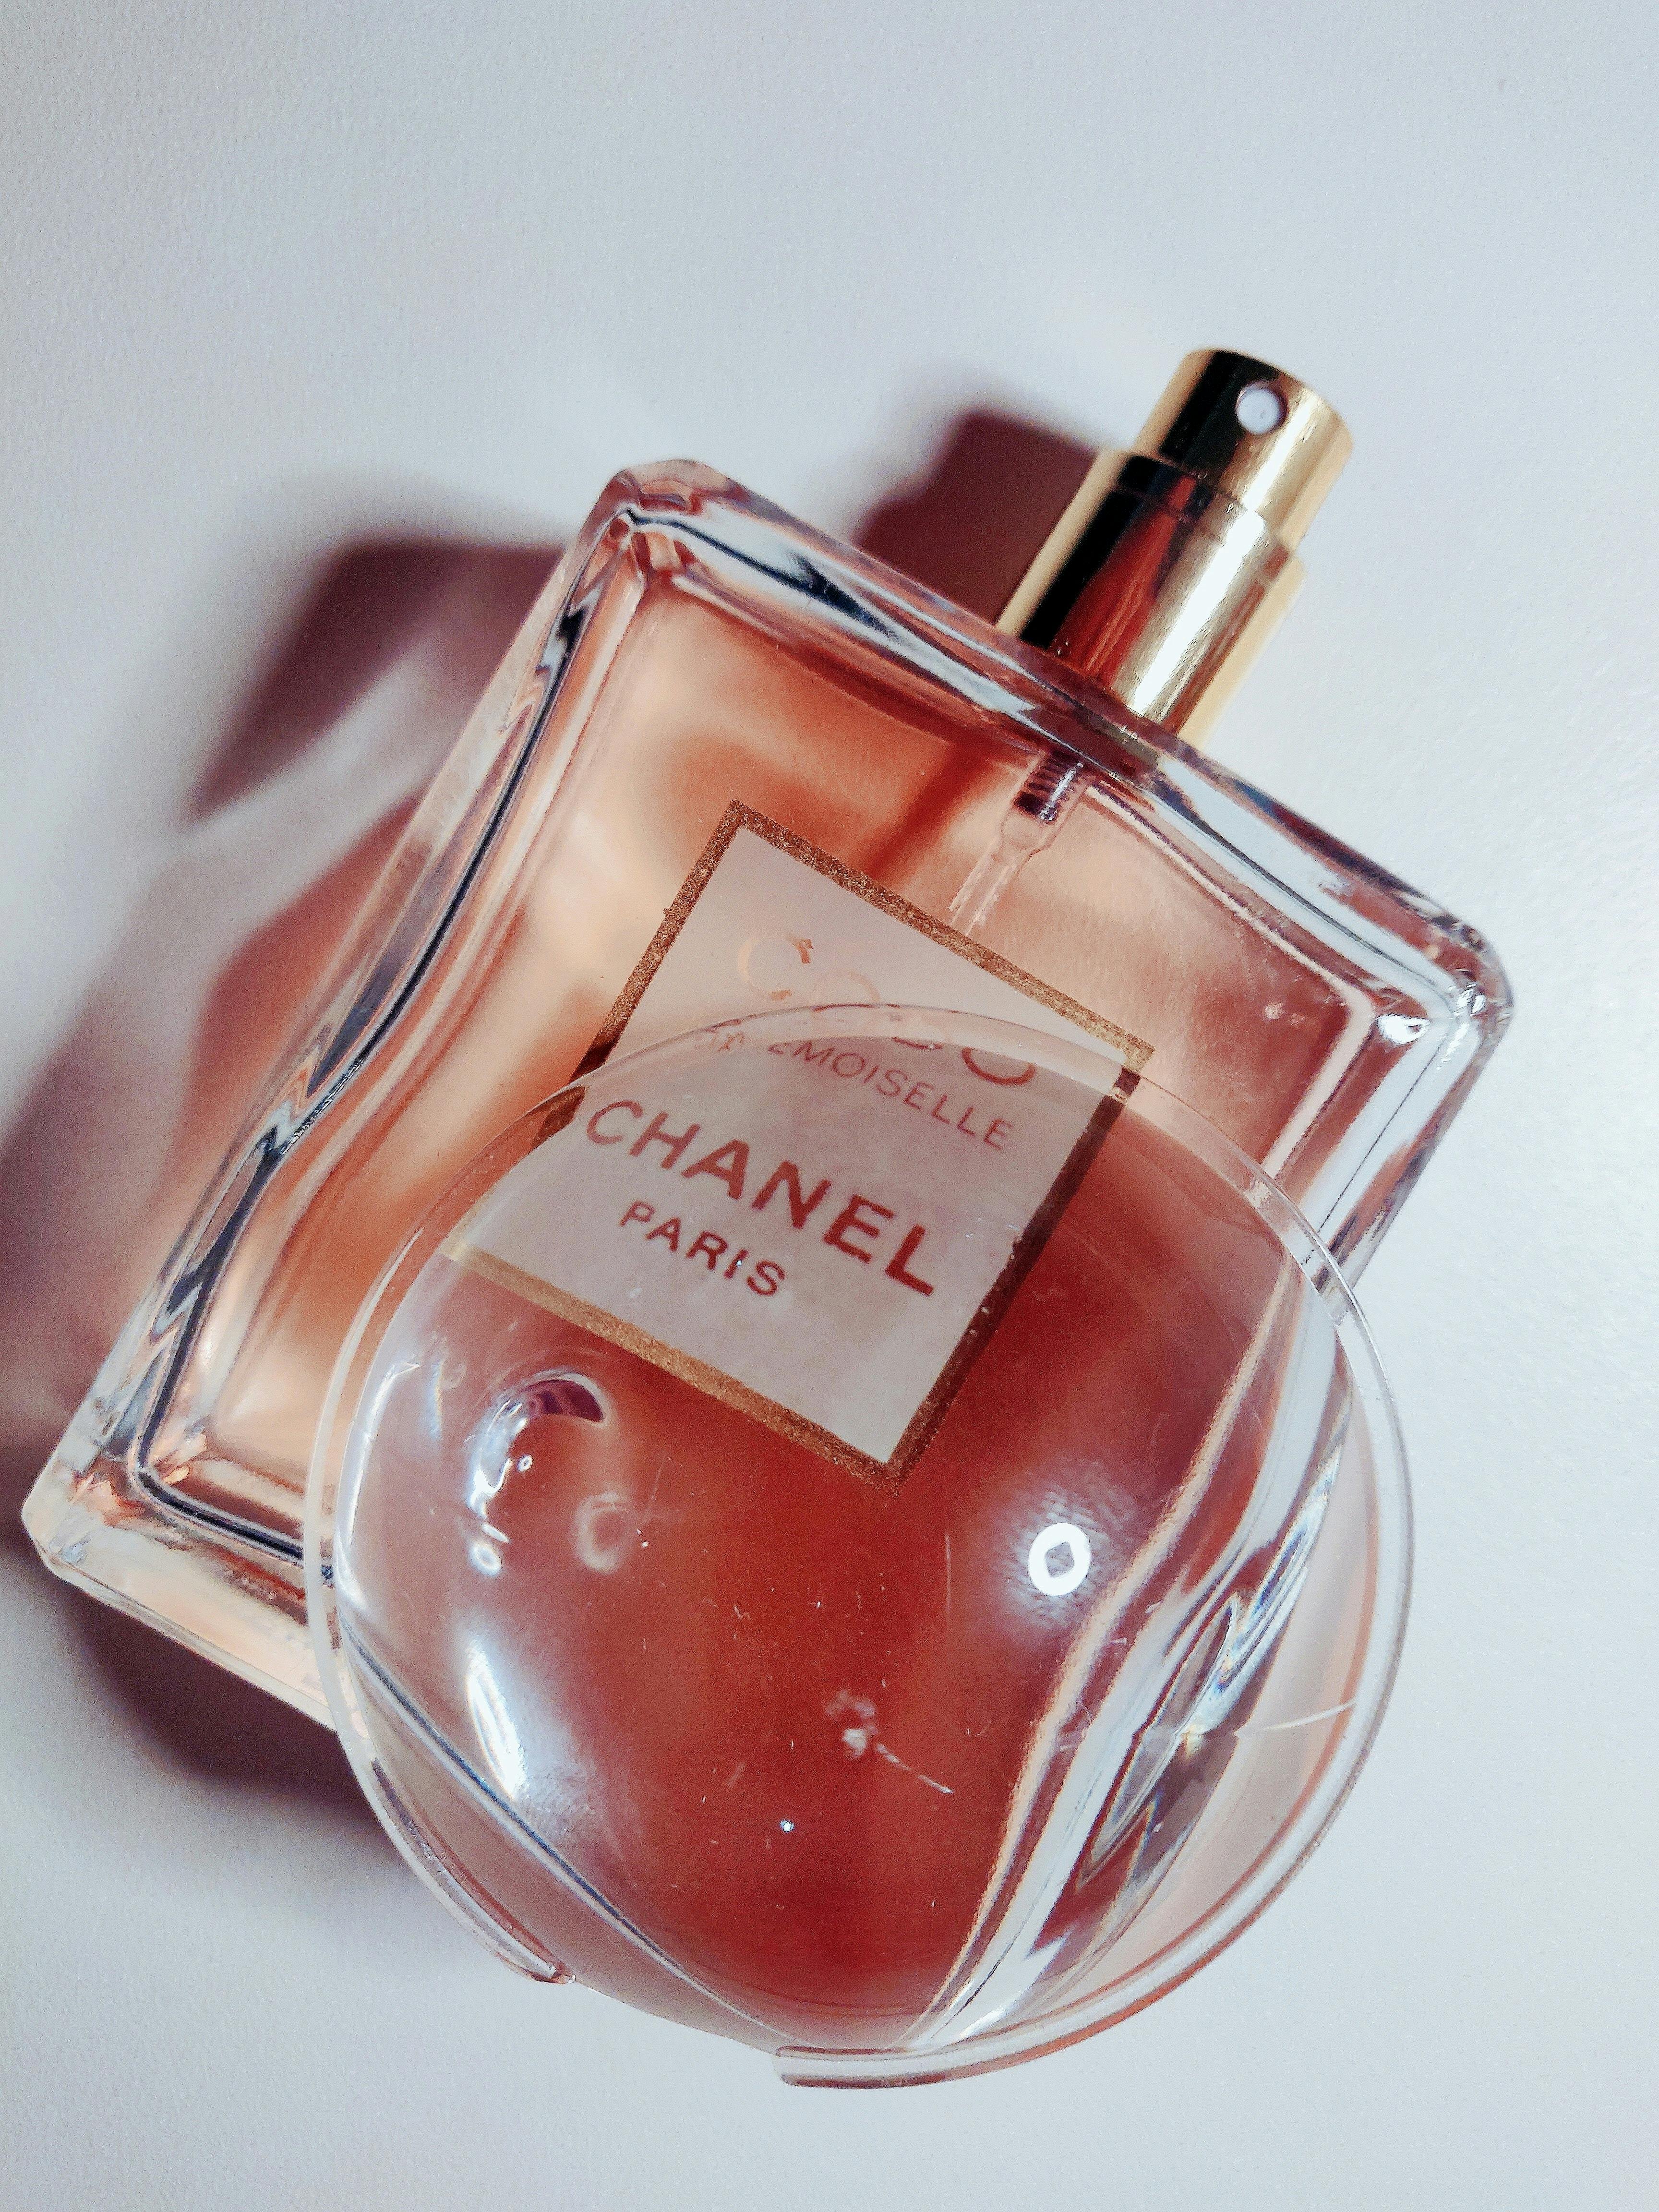 Chanel perfume bottle Stock Photos and Images